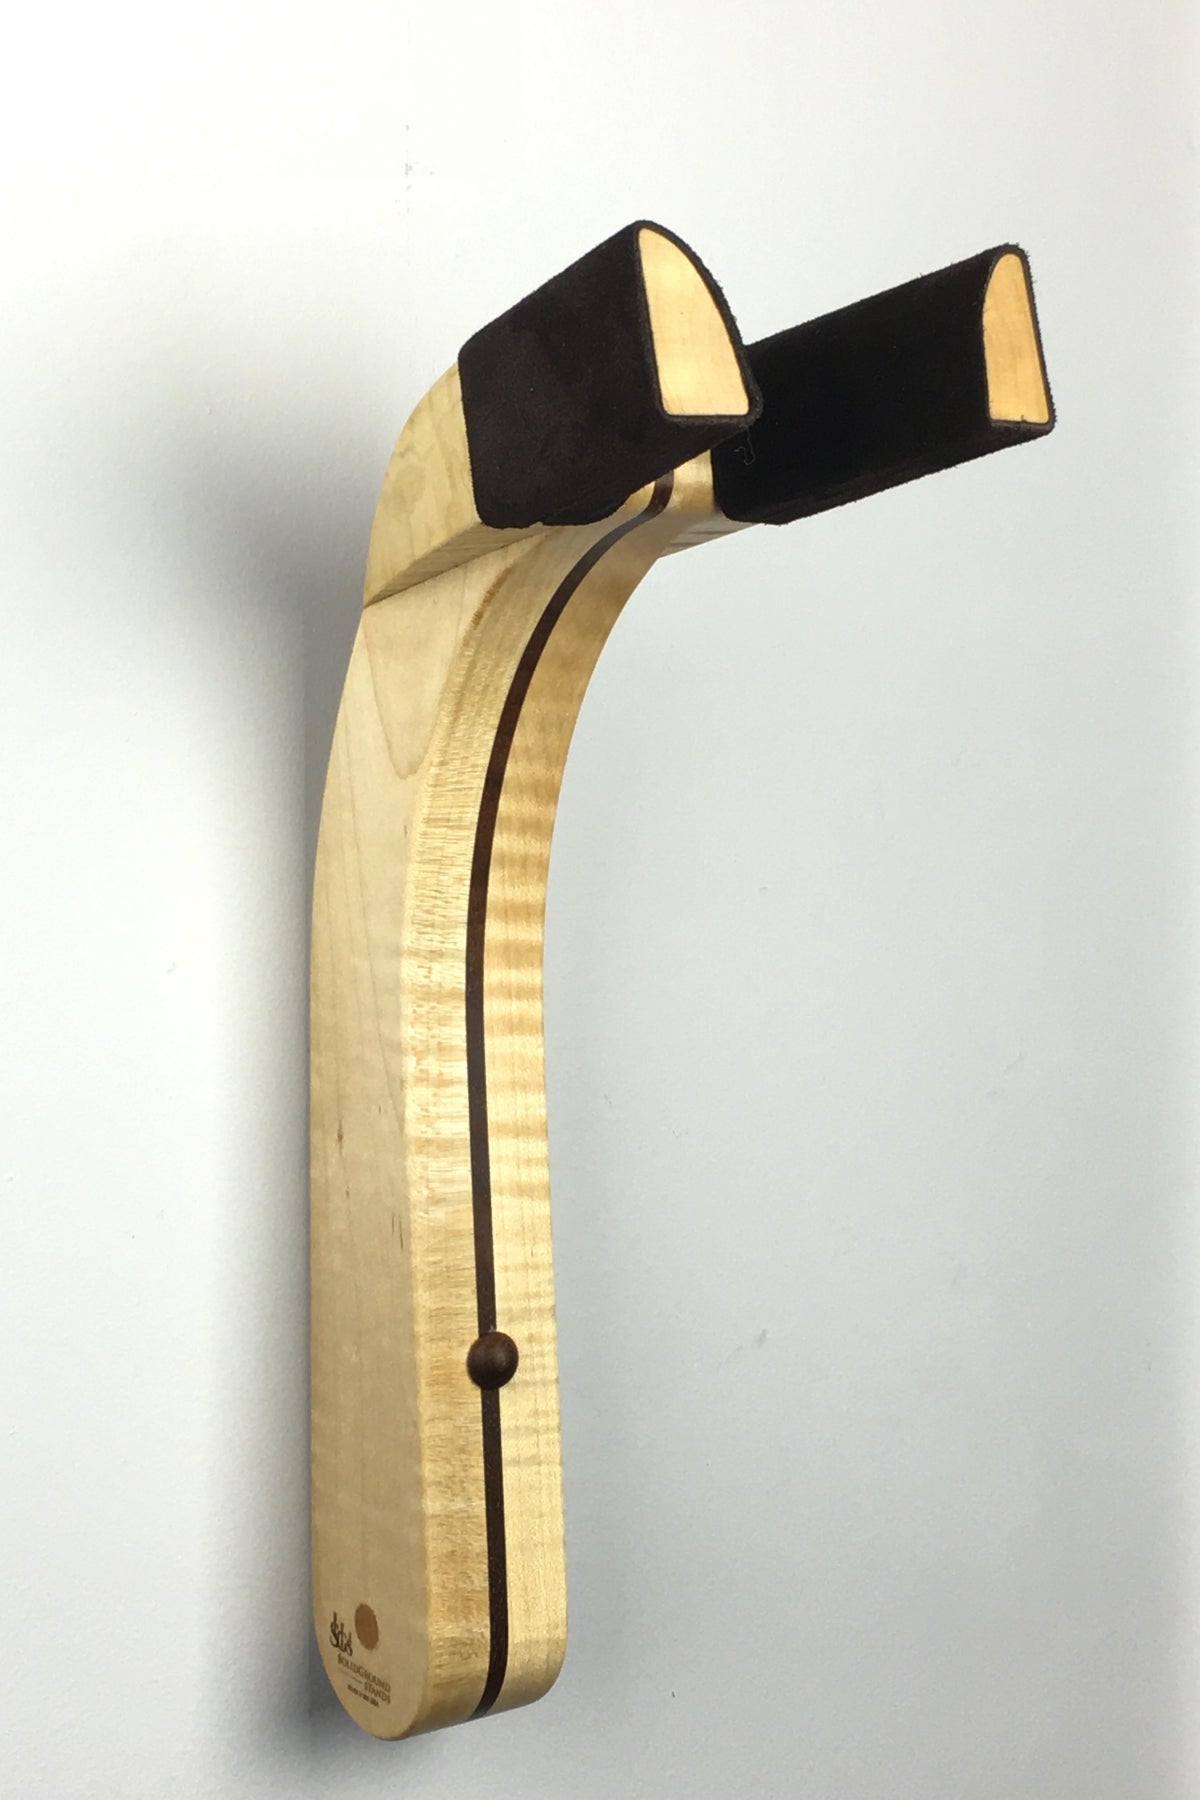 Curly maple and walnut wood guitar wall mount hanger